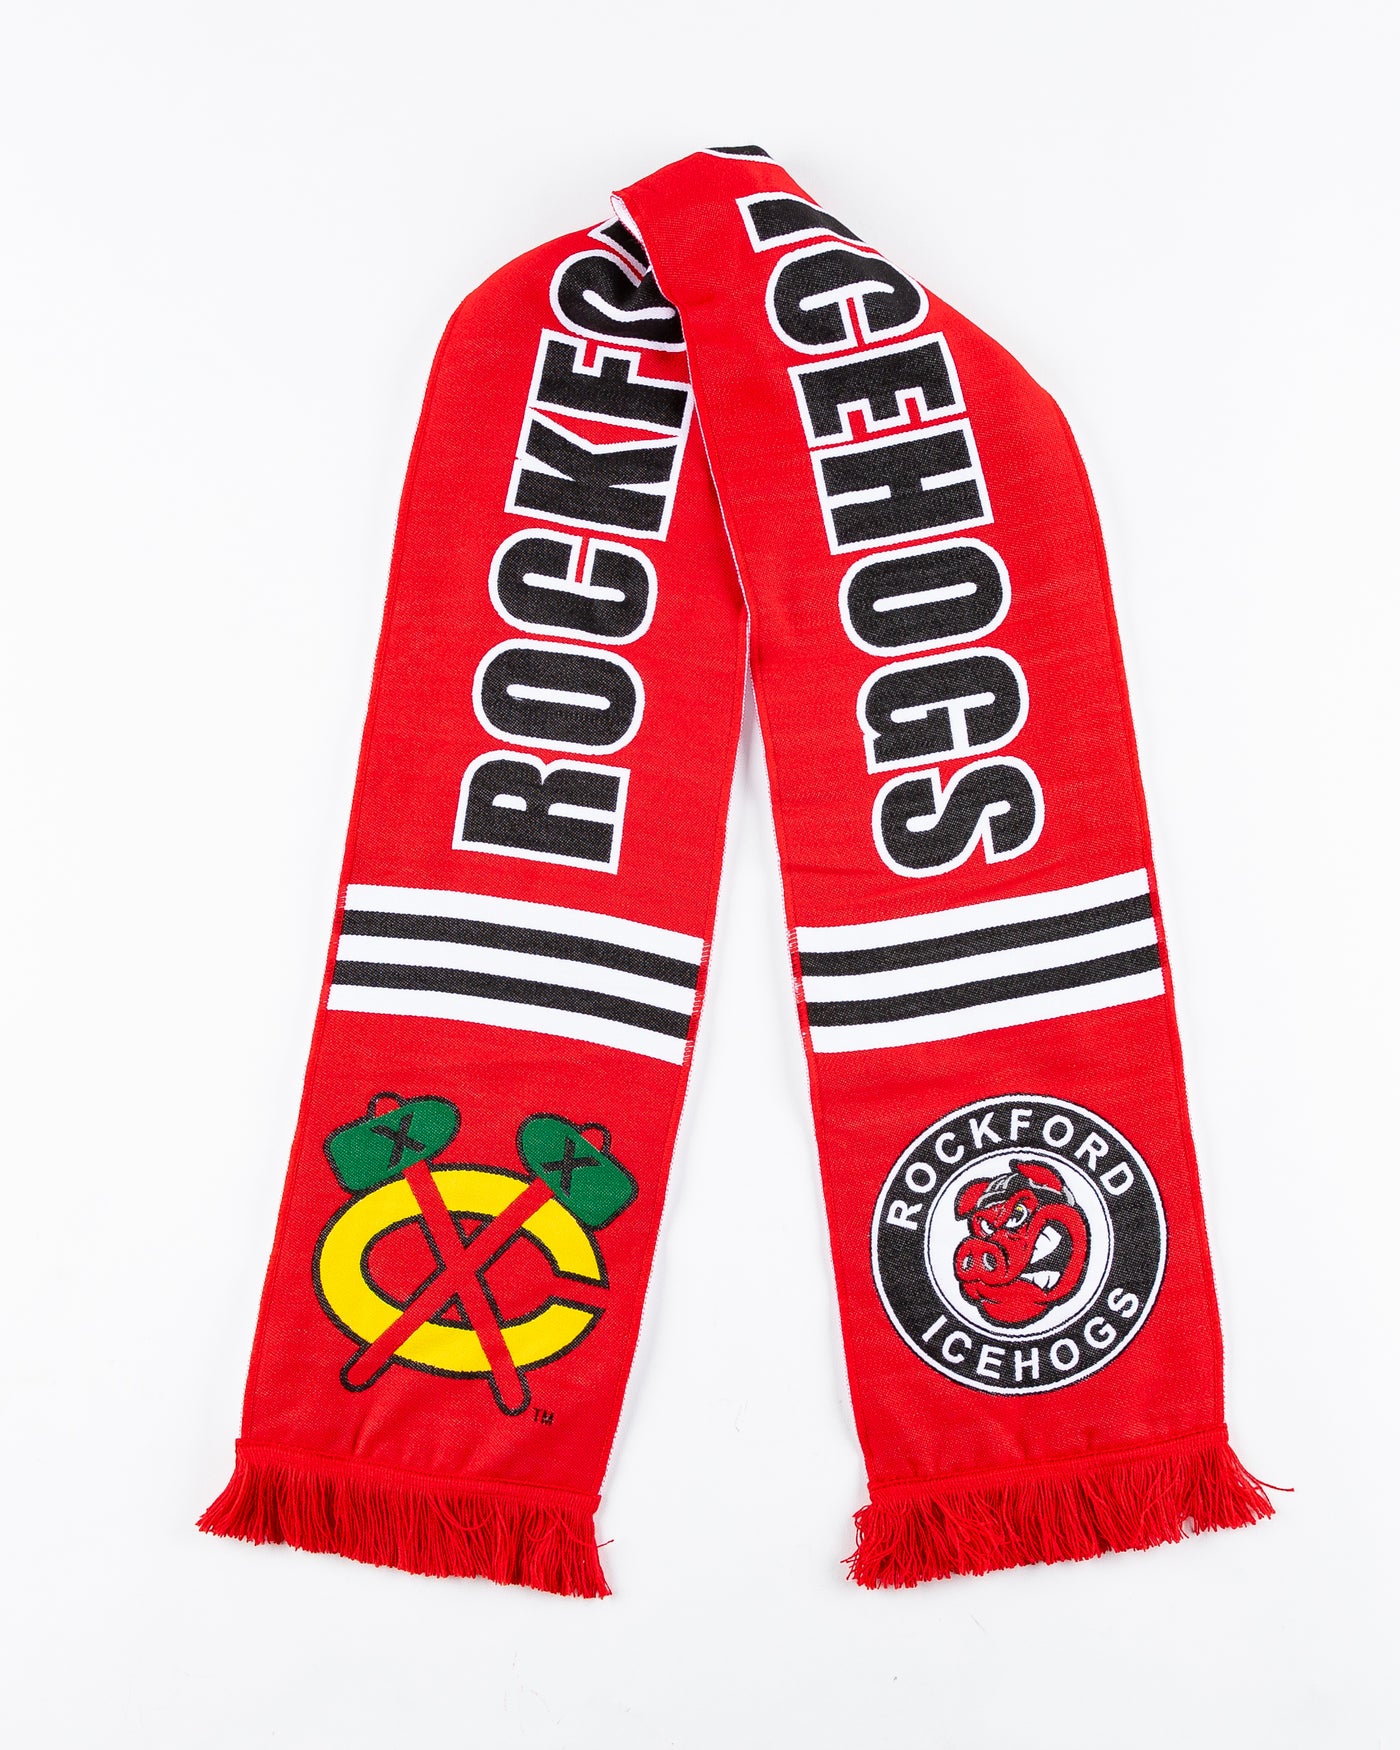 red Rockford IceHogs scarf with wordmark, logo and secondary Chicago Blackhawks logo - front lay flat